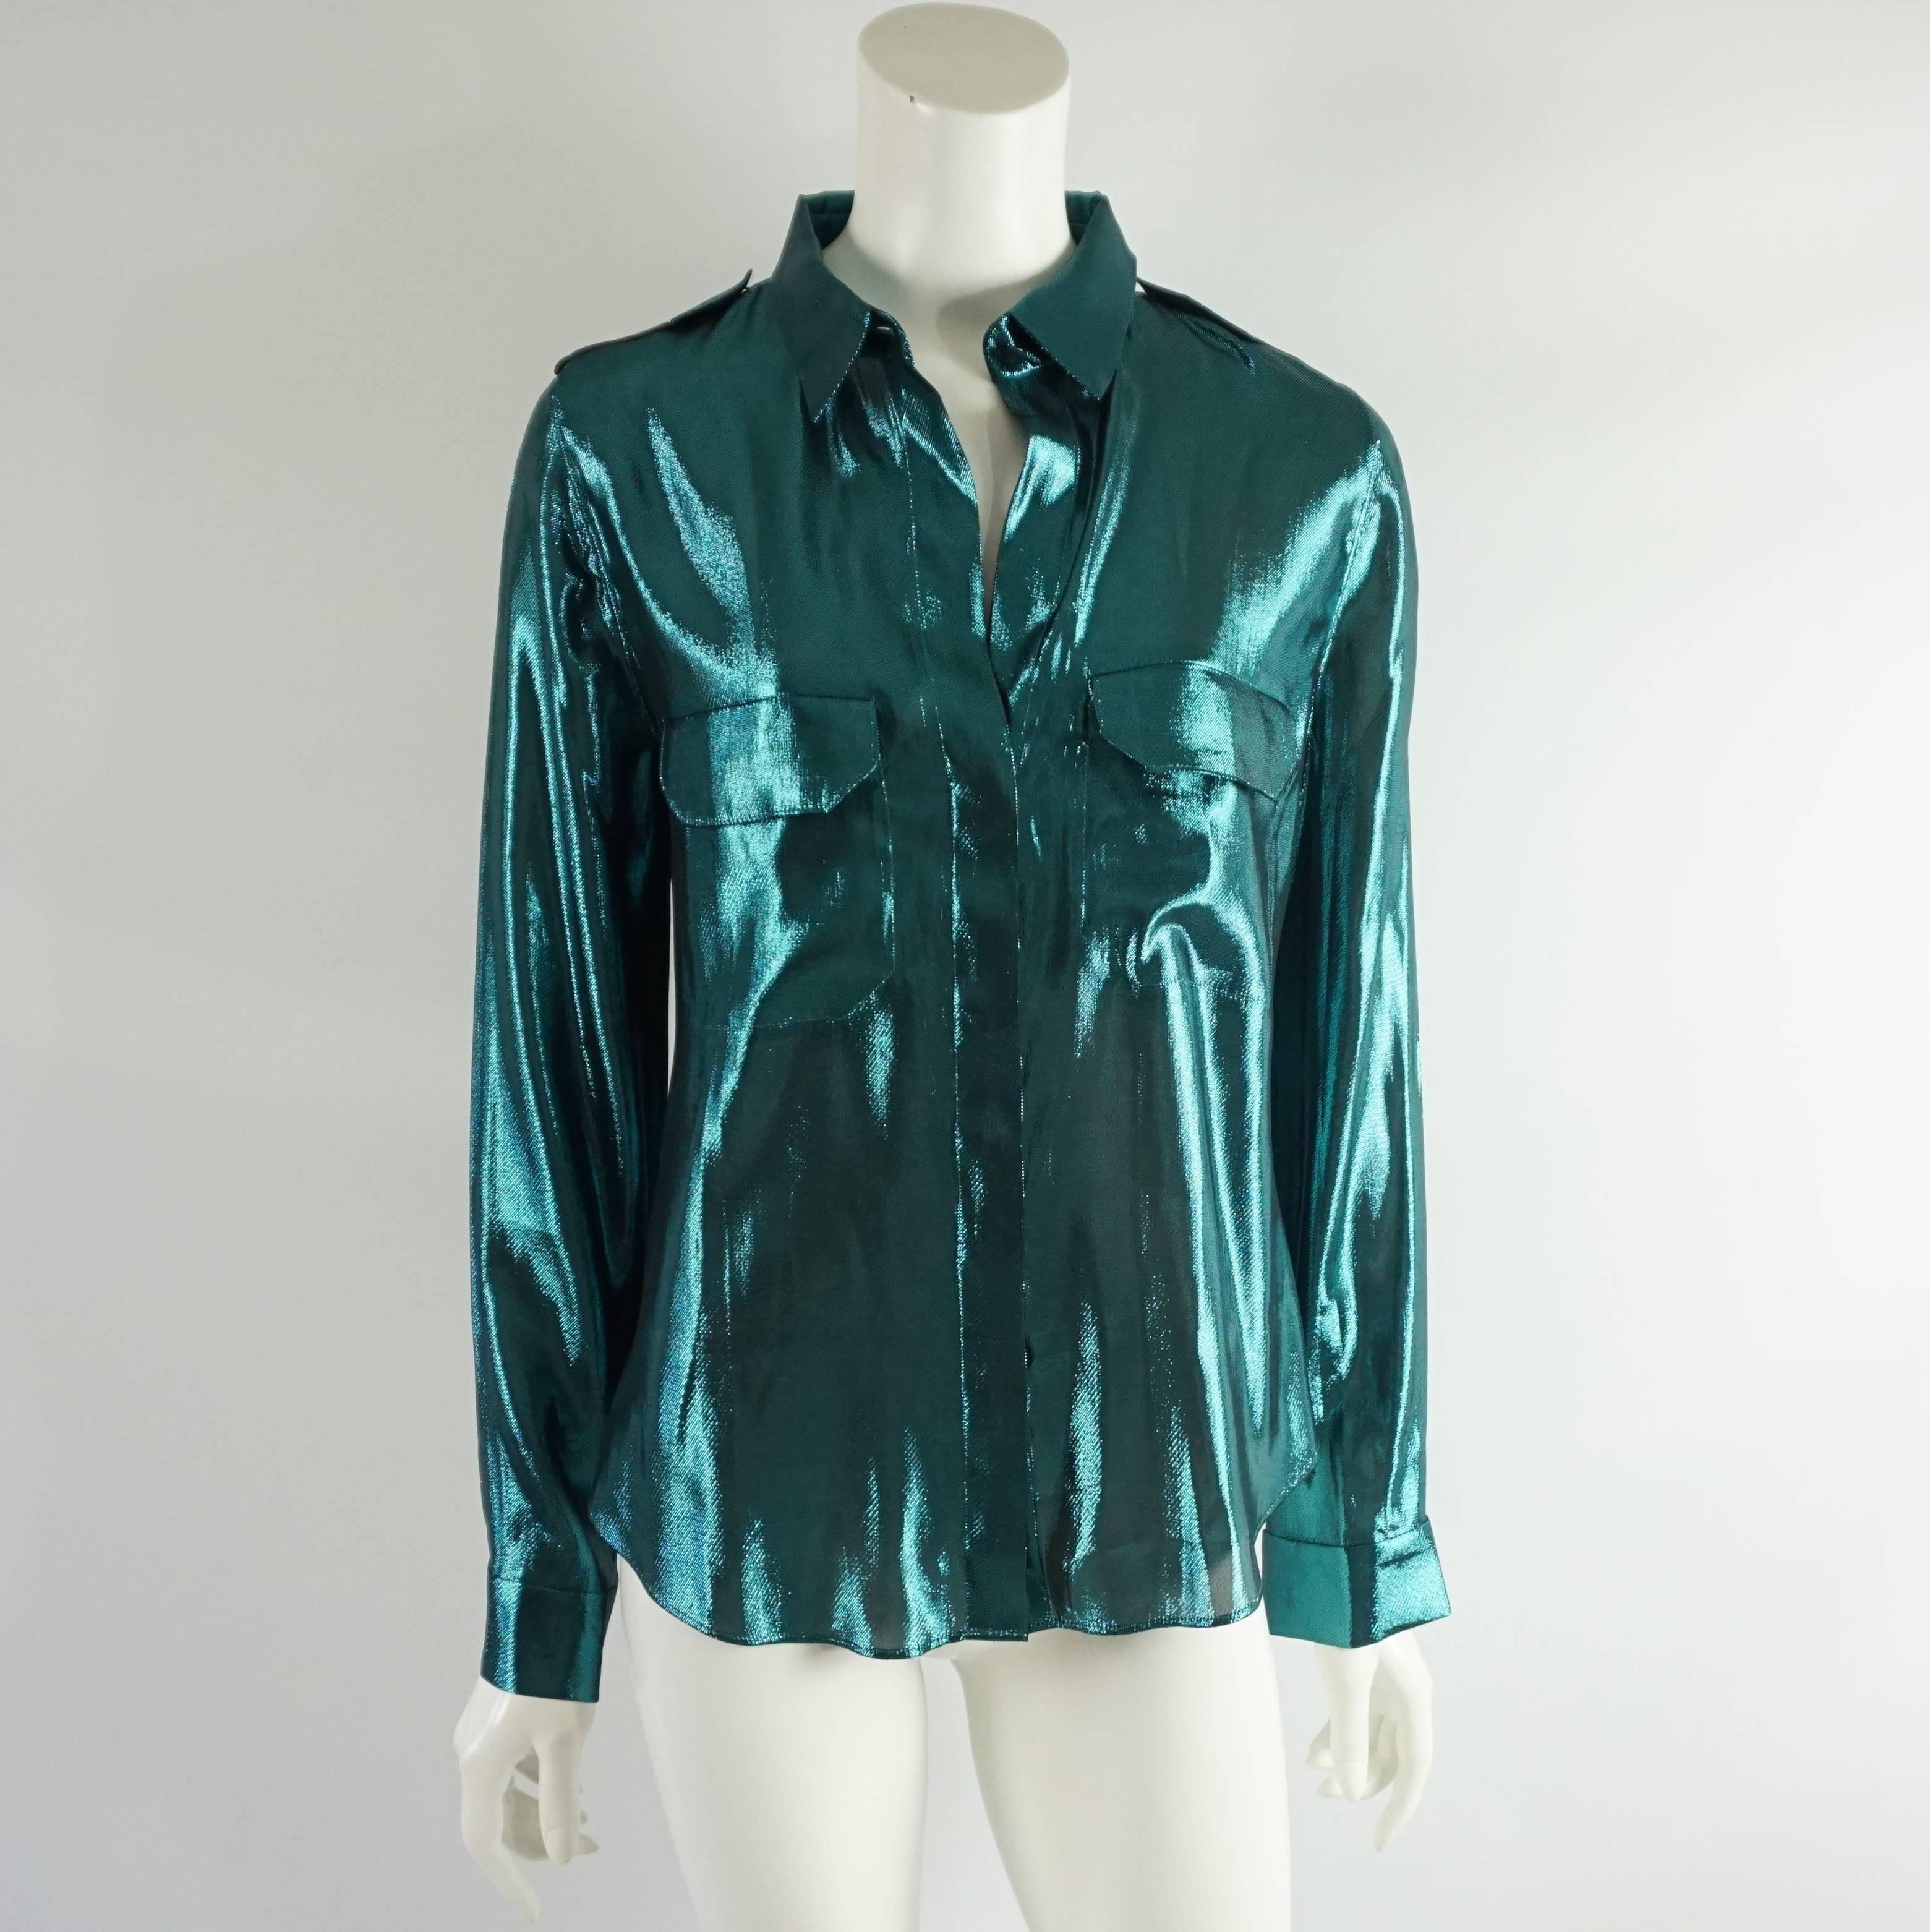 This Lanvin silk lame shirt is an eye-catching metallic teal color. There are 2 front pockets, both with a flap, and hidden buttons going down the front. This shirt is in excellent condition.

Measurements
Shoulder to Shoulder: 15.75